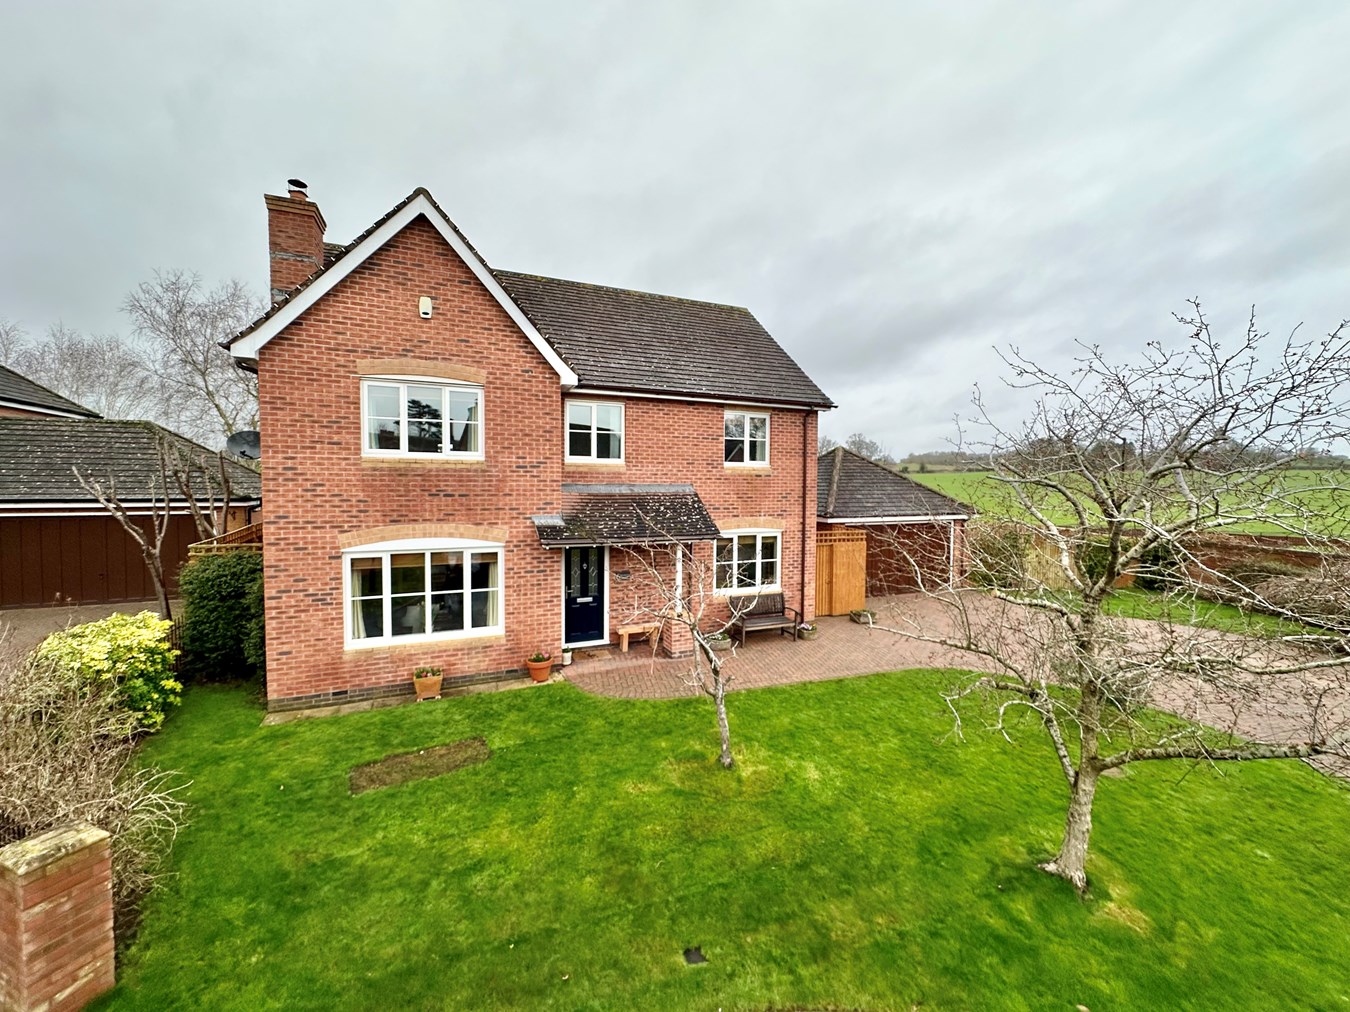 Sycamore Lane, Burghill, Hereford, HR4